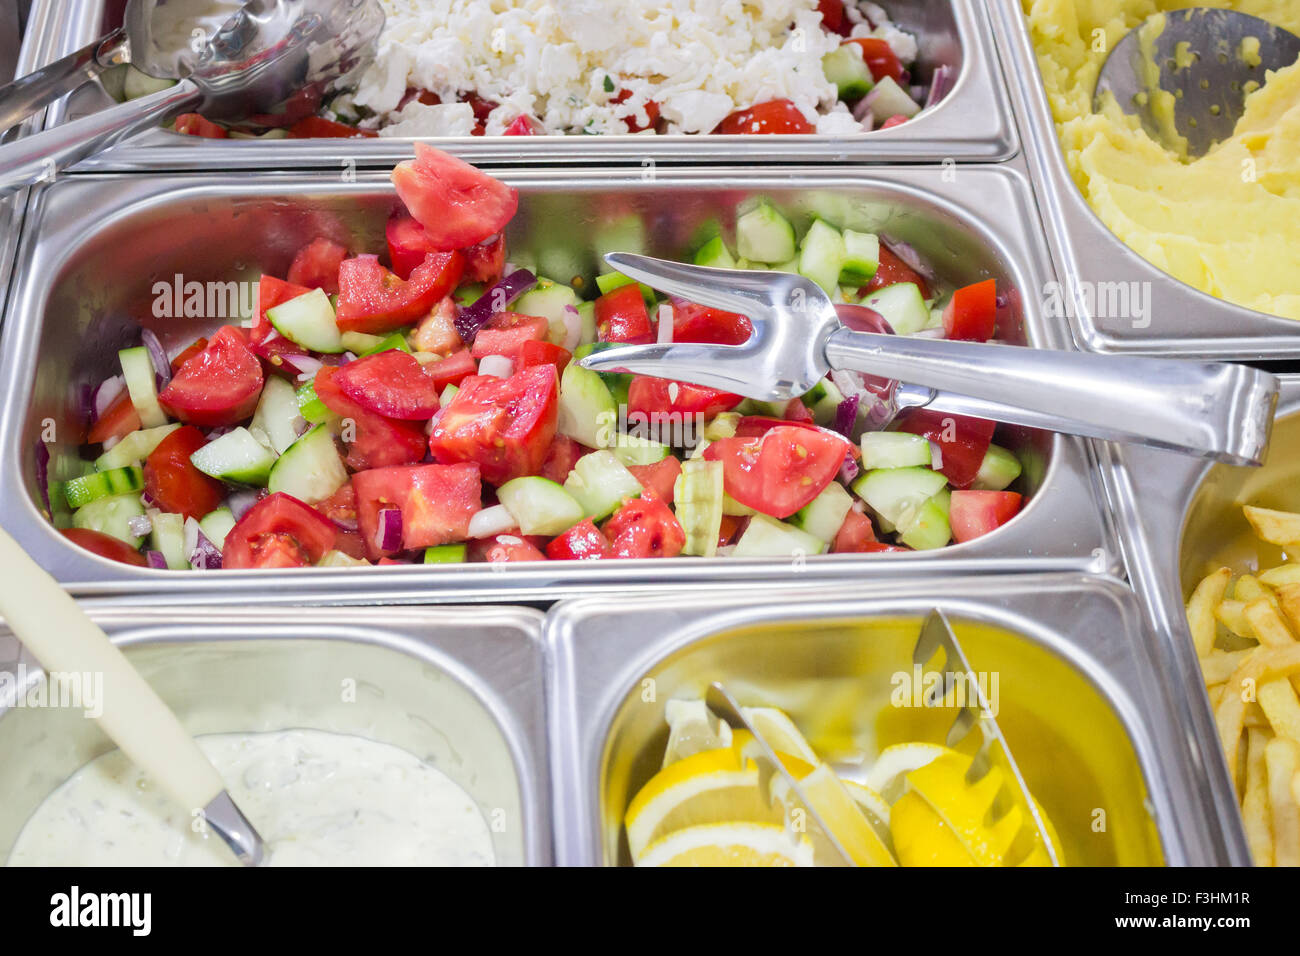 Salad bar in a cafeteria with fresh mixed salads and dressings Stock Photo